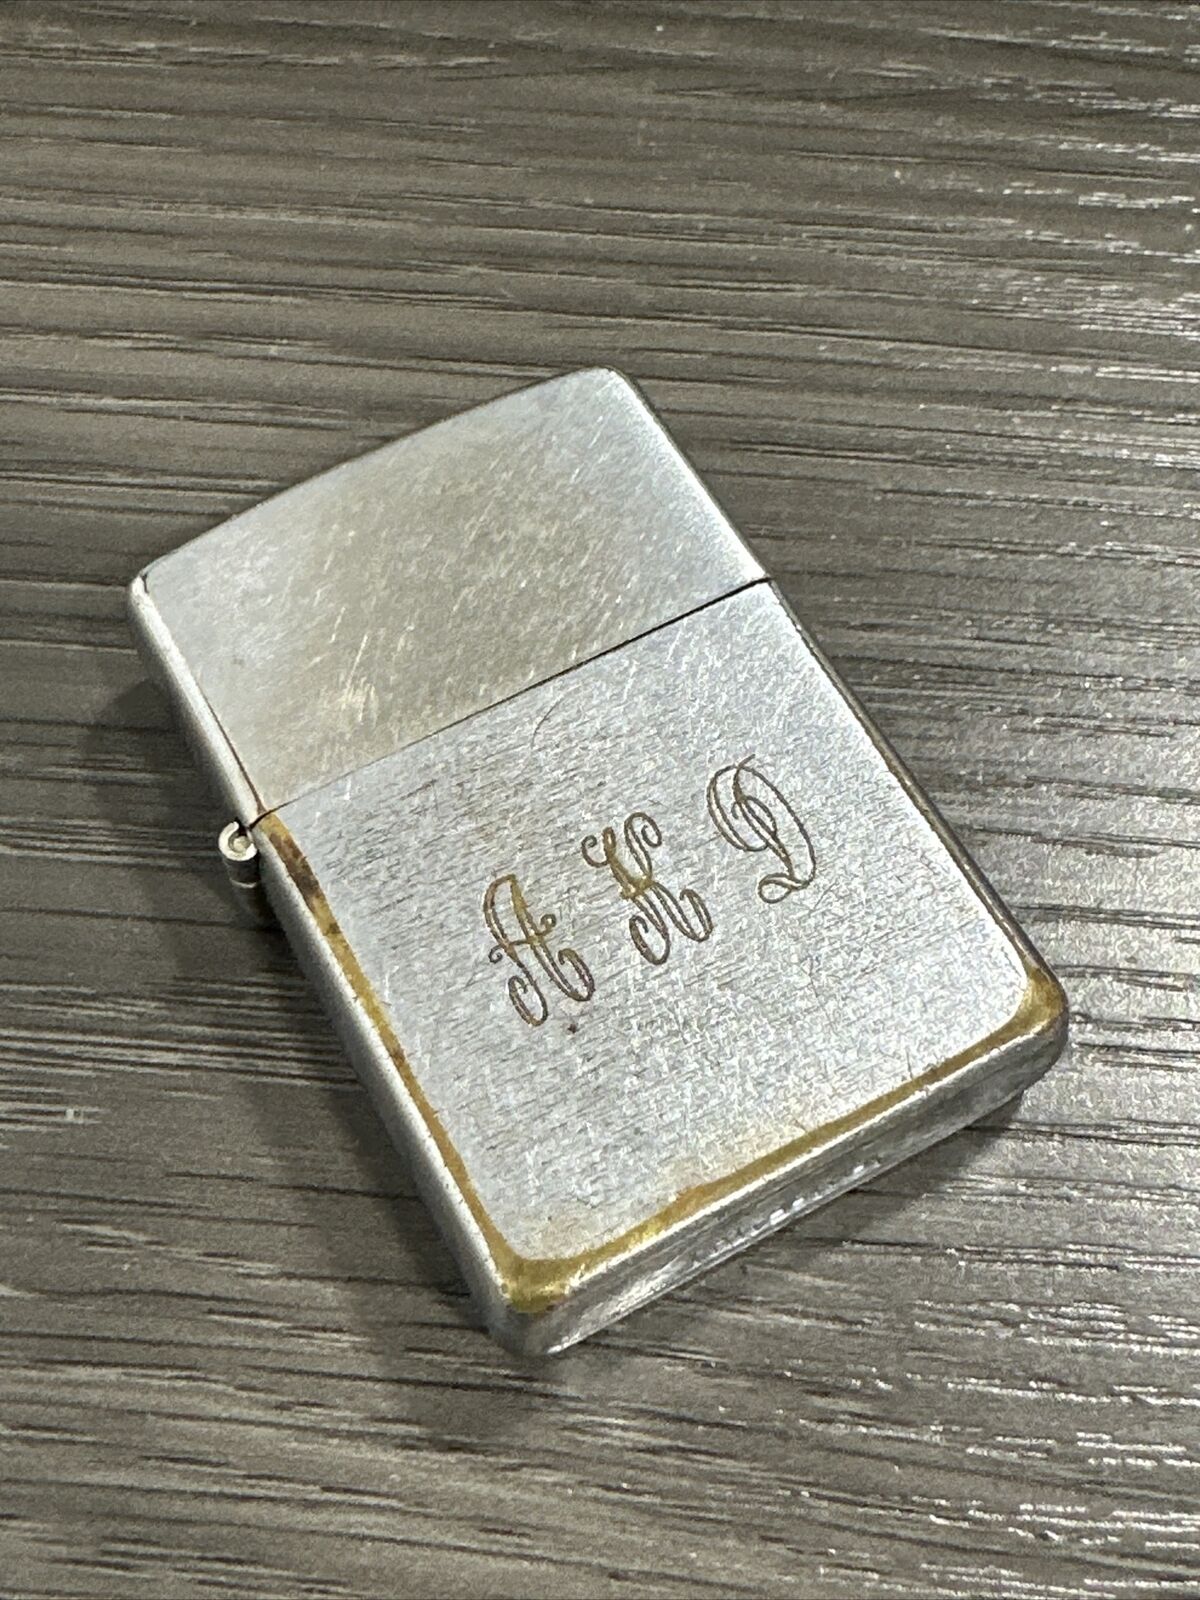 Early 1960s Classic Vintage Zippo Lighter - Brushed Chrome Finish